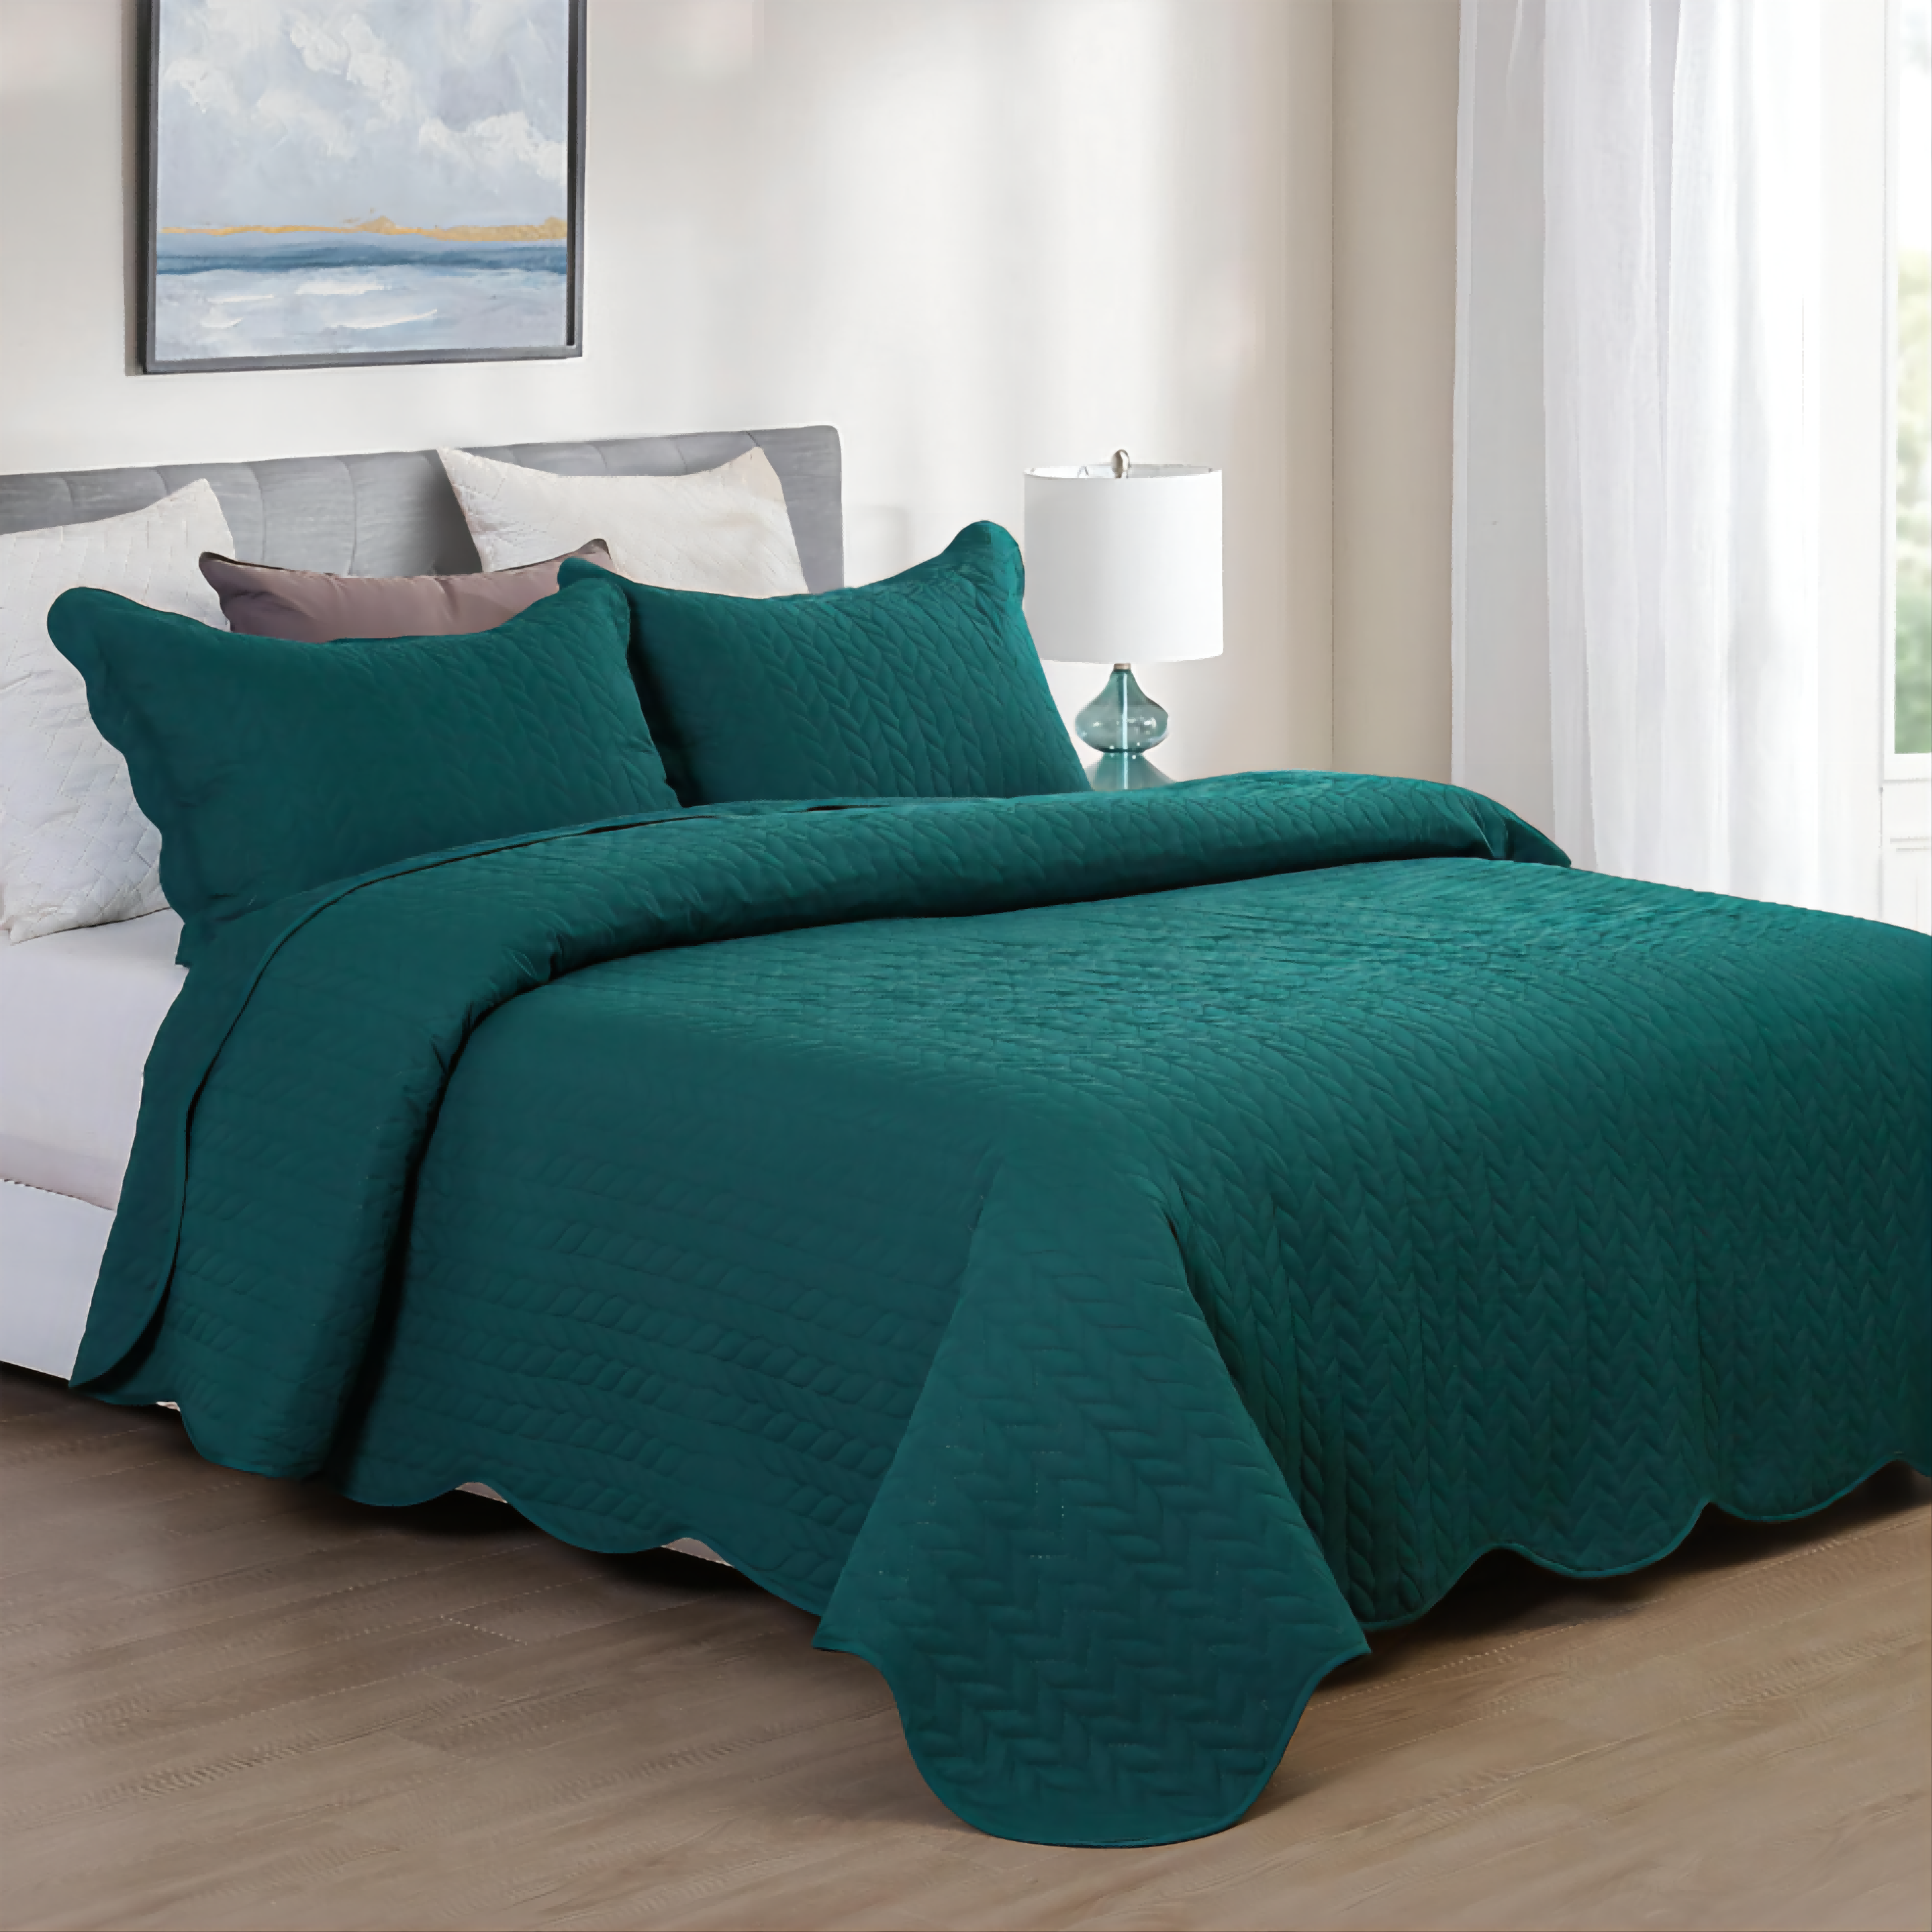 High Quality Goose Down Feathers Exporters –  All Season Quilt Set 3 Piece Bedspread Coverlet Set Emerald Green – HANYUN